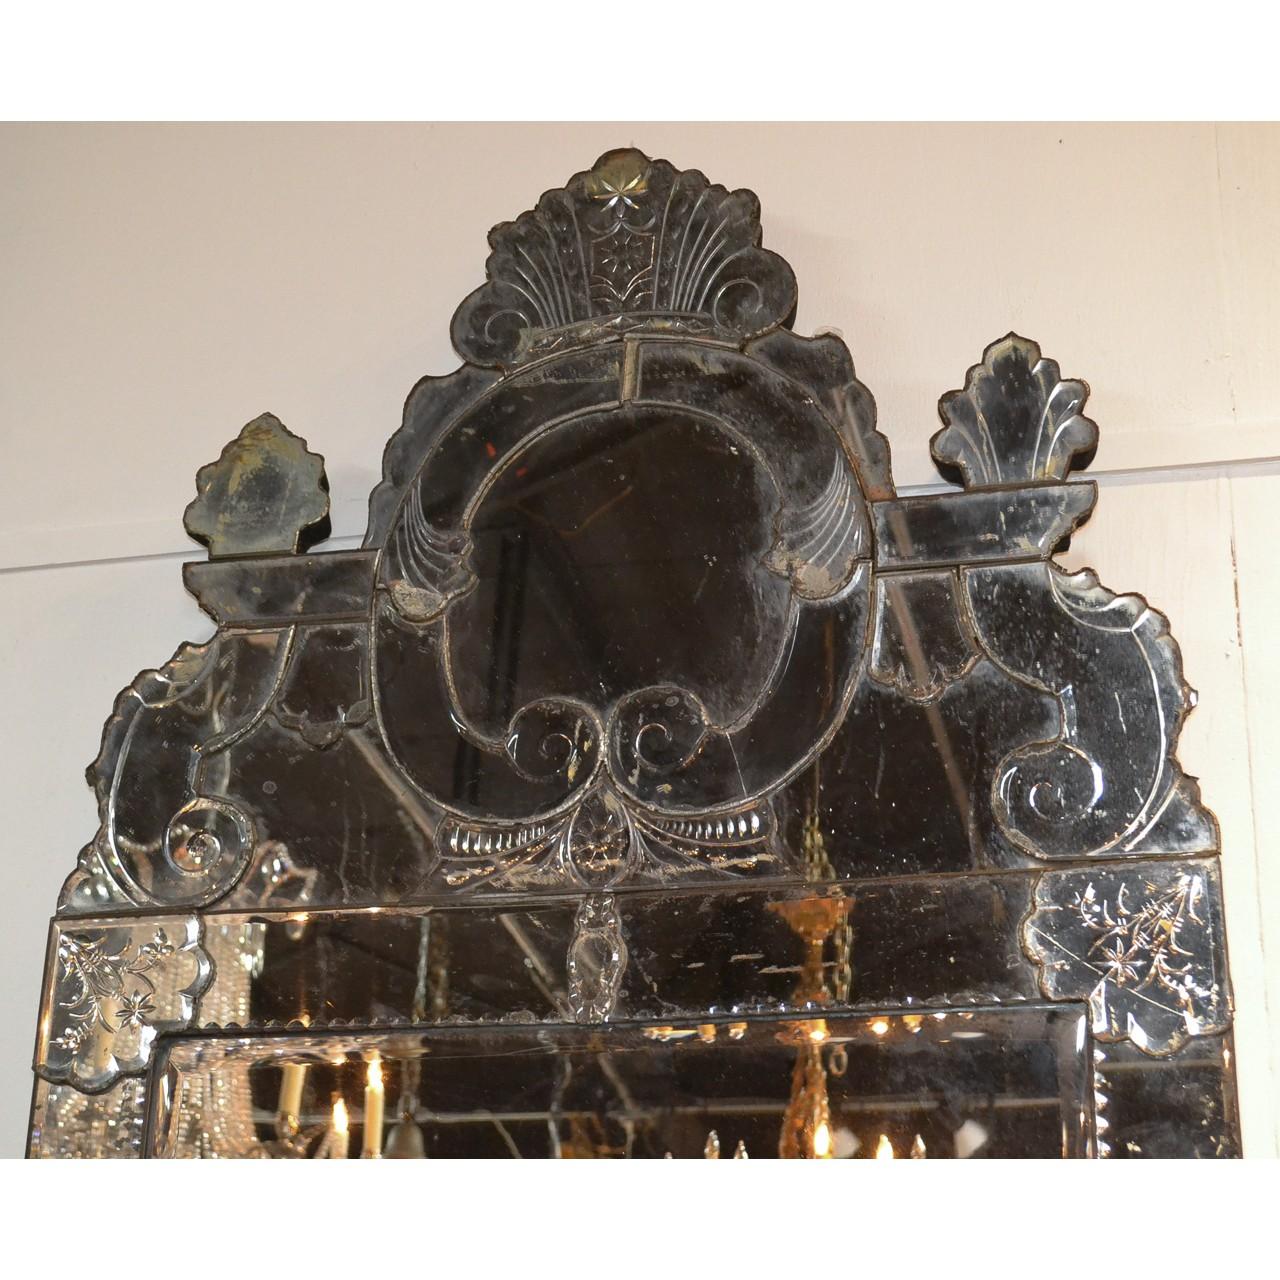 Magnificent 19th century Venetian glass silvered mirror of palatial size with a beautifully shaped crest and etched decorations. The mirror has a hardwood backing,

circa 1880.